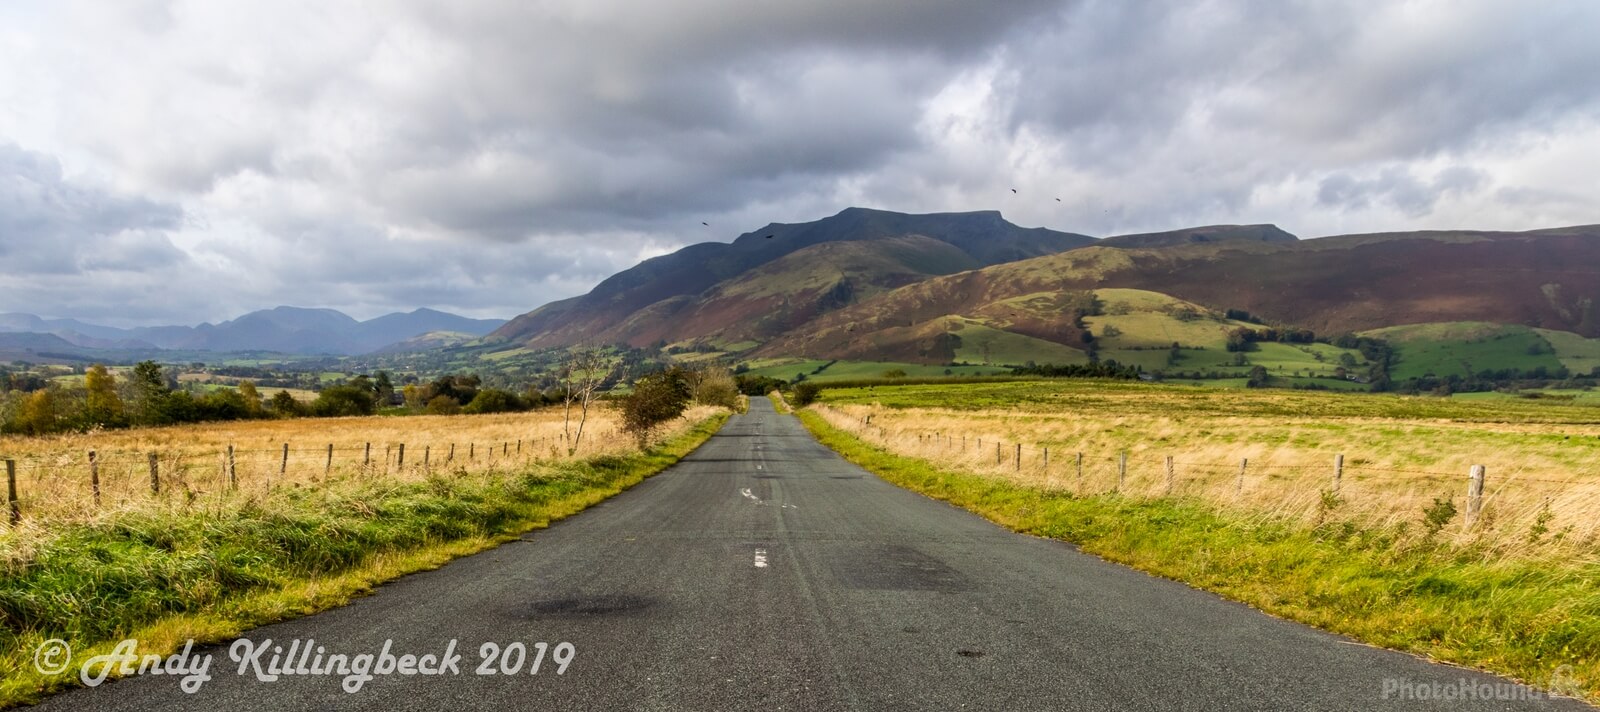 Image of Blencathra by Andy Killingbeck